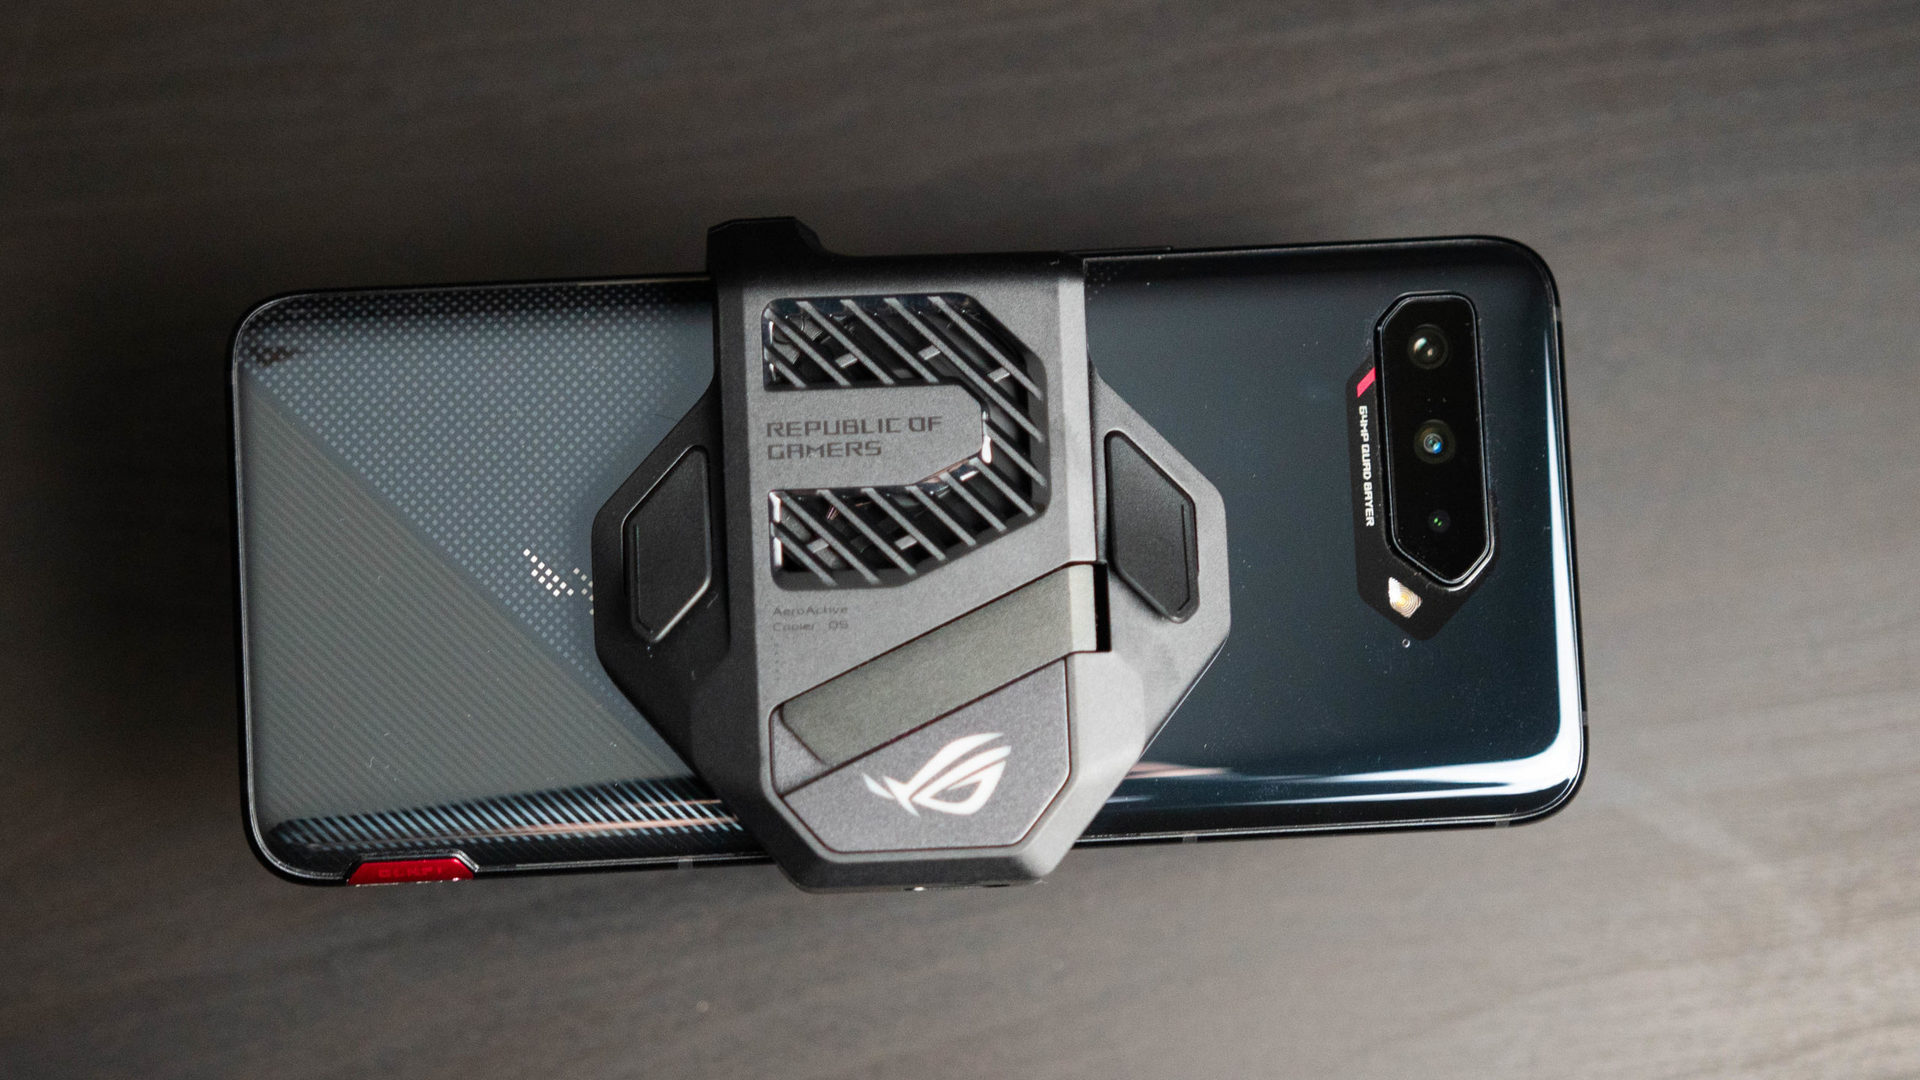 Asus ROG Phone 5 product shot of the AeroActive cooler on the device itself